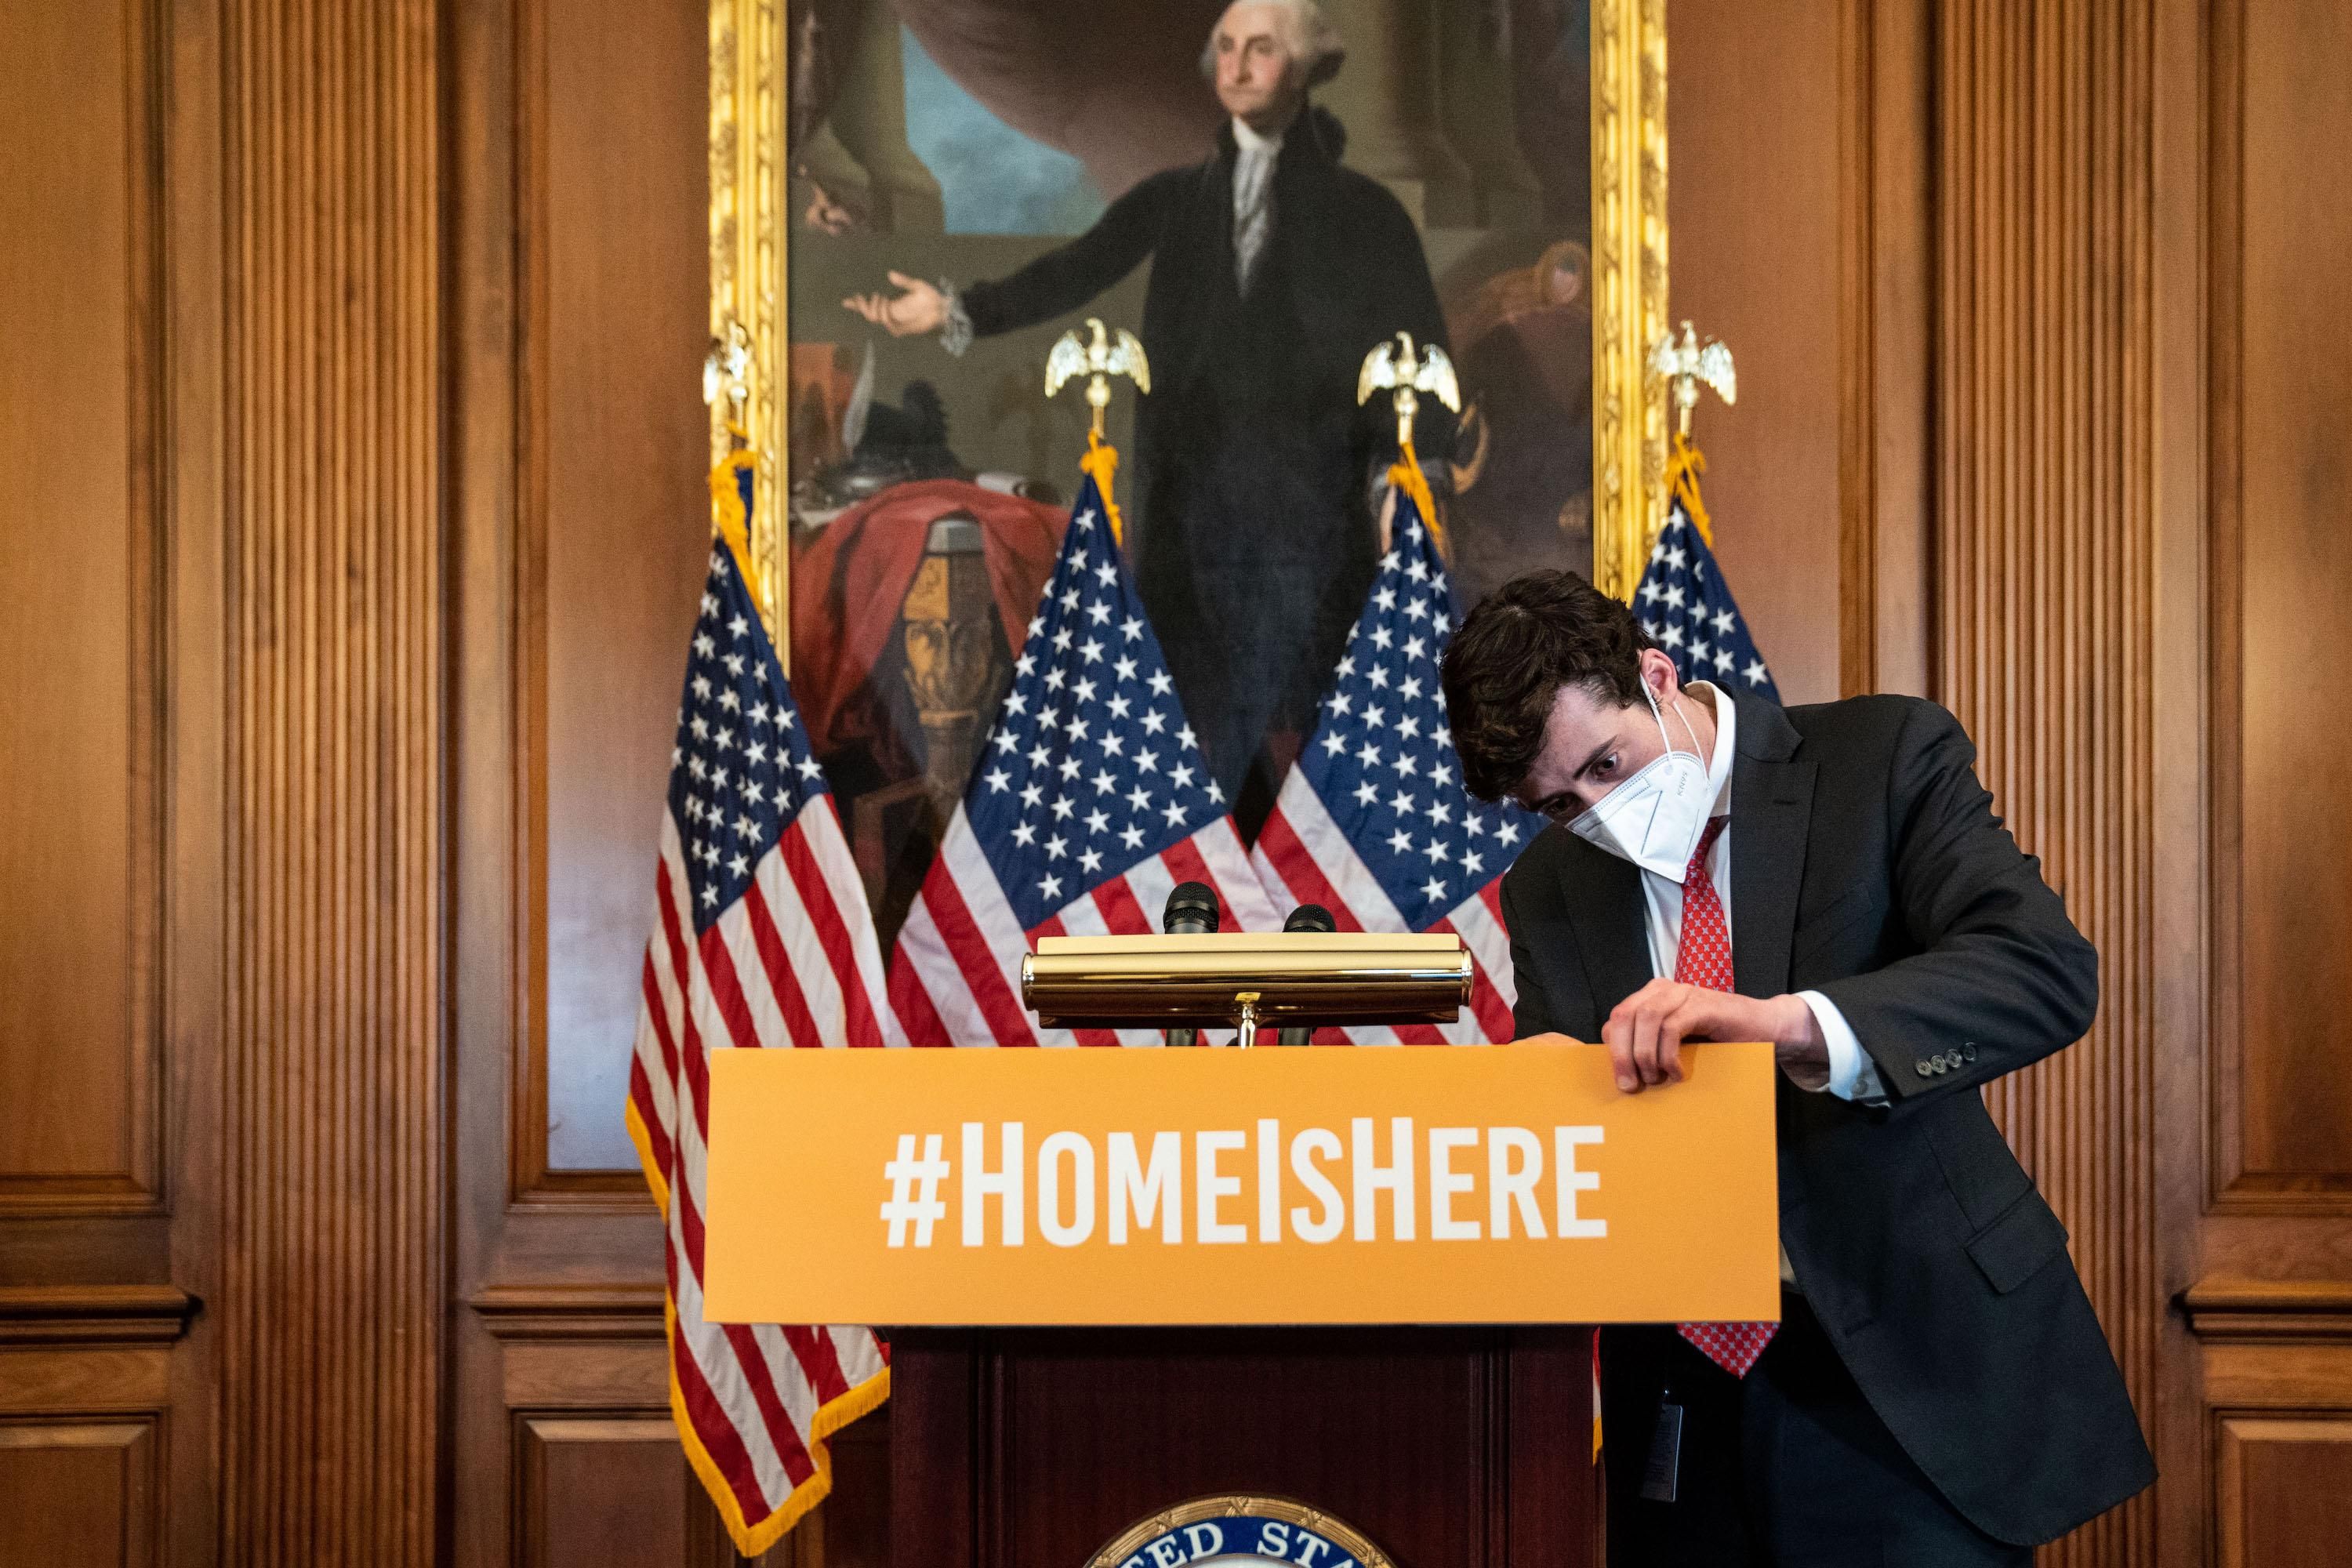 A congressional staffer adjusts a sign before the start of a press conference